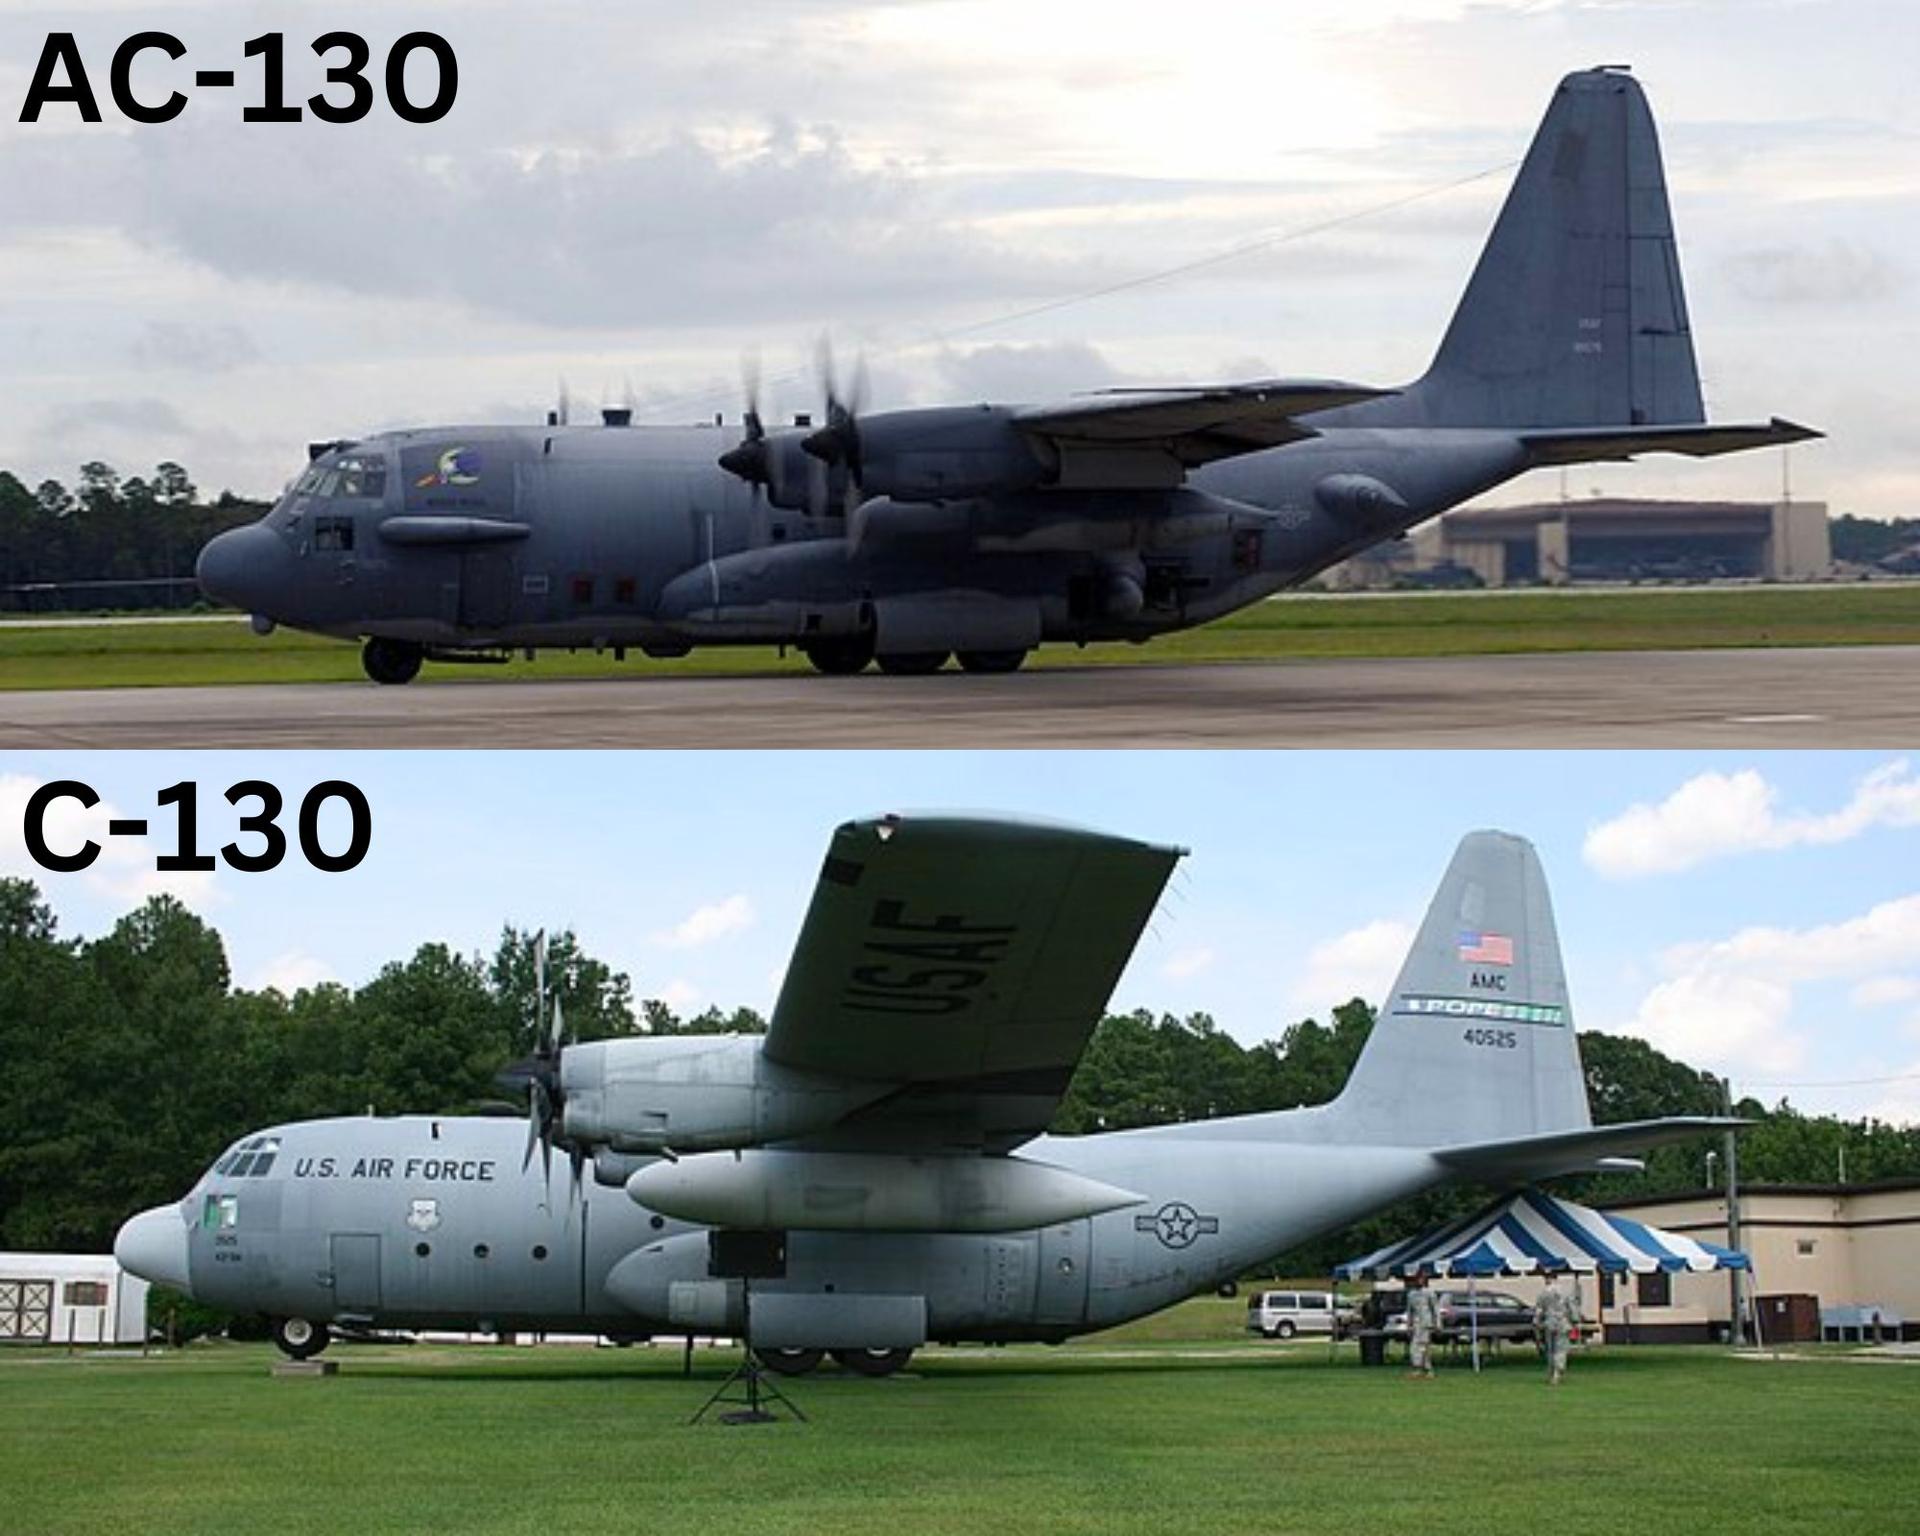 A side by side comparison of an AC-130 (top) and C-130 (bottom).